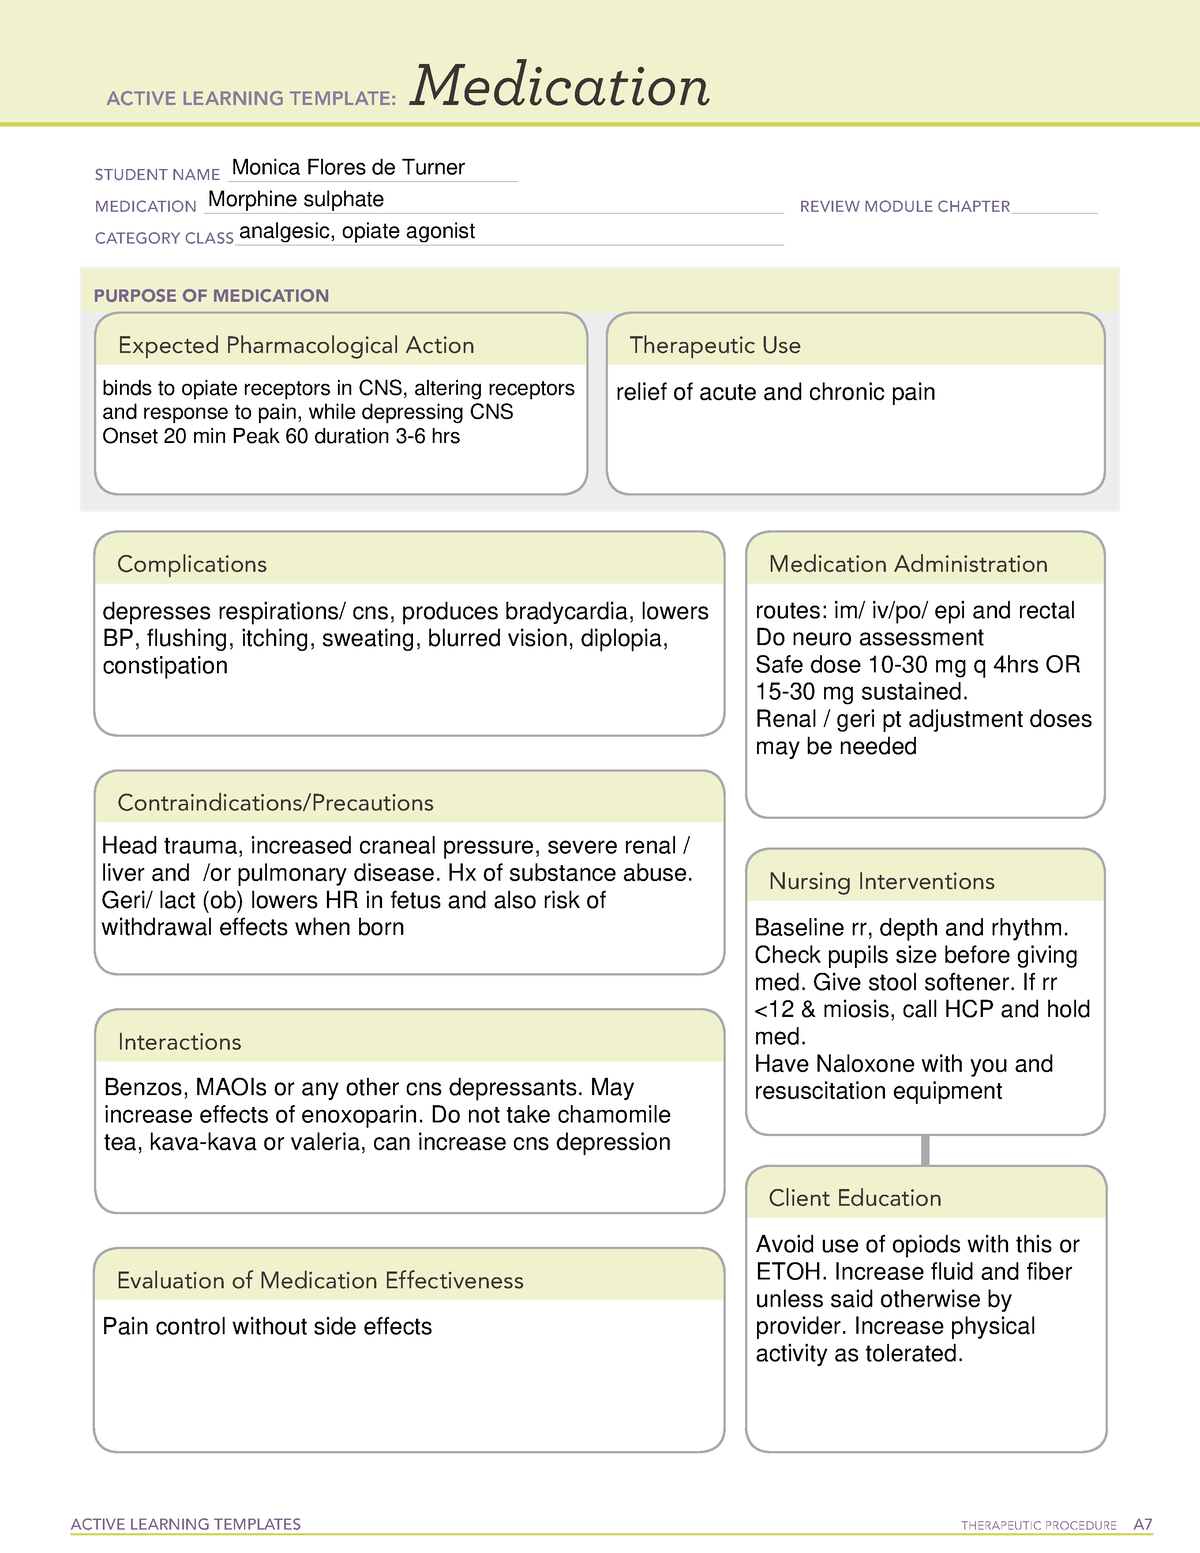 Morphine Ati template for medication ACTIVE LEARNING TEMPLATES